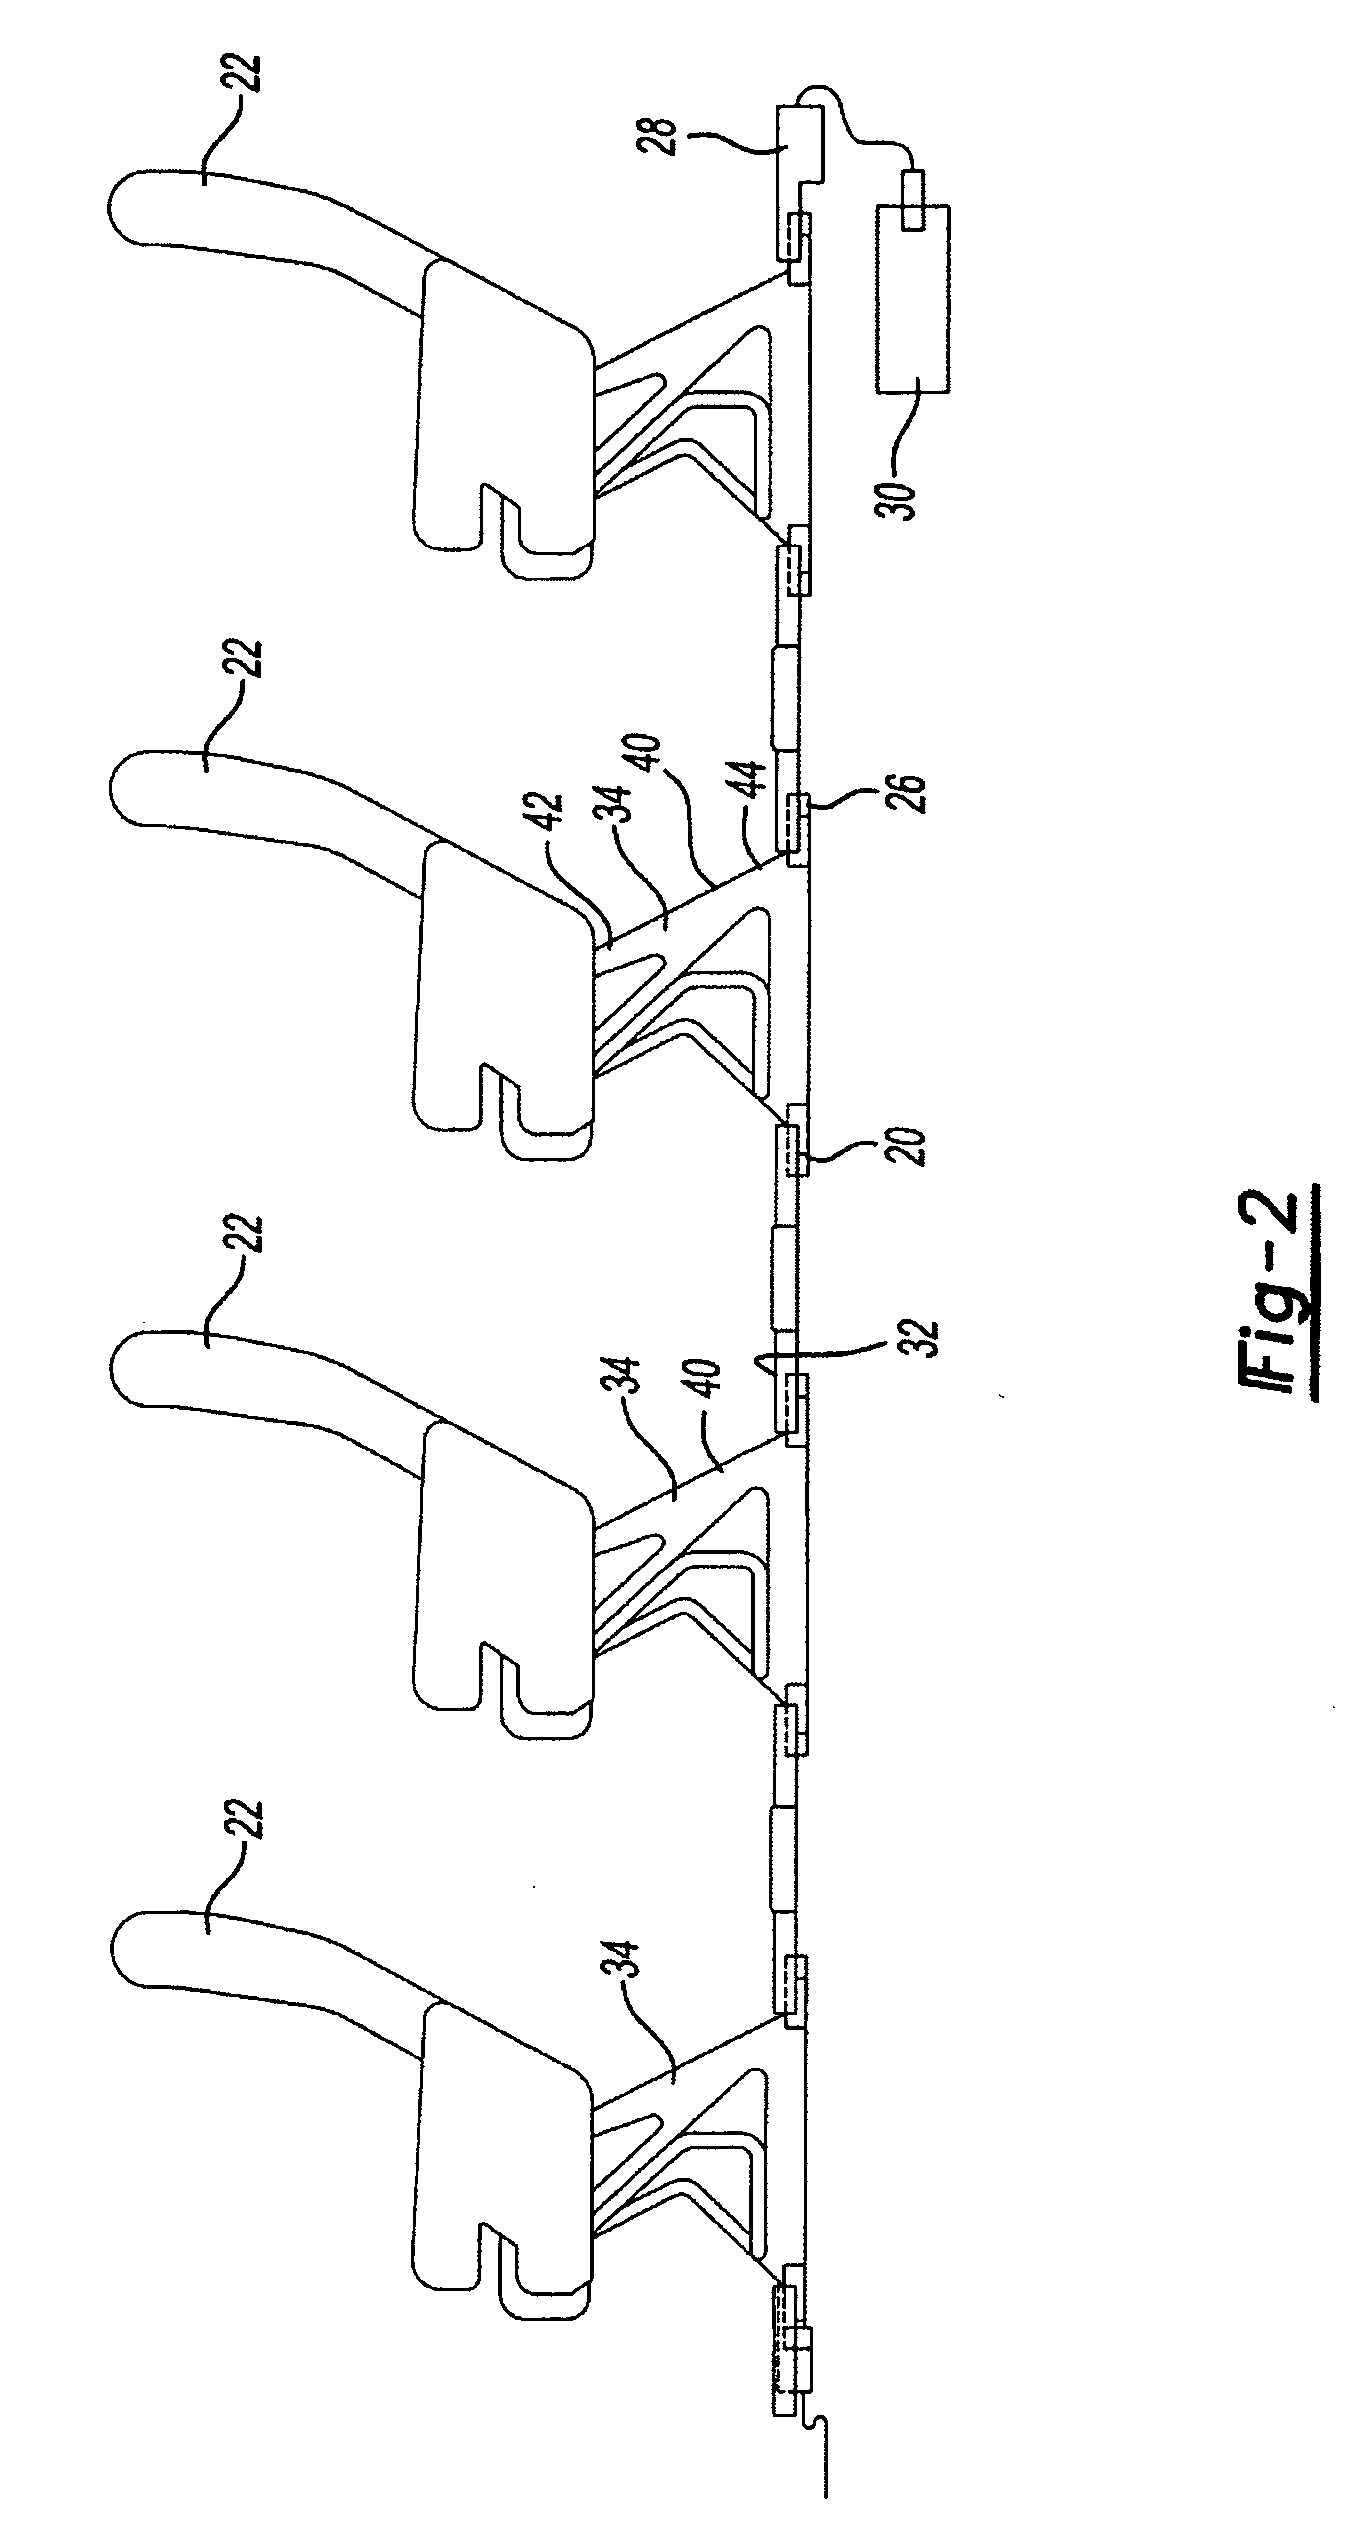 Seat interface for powered seat track cover